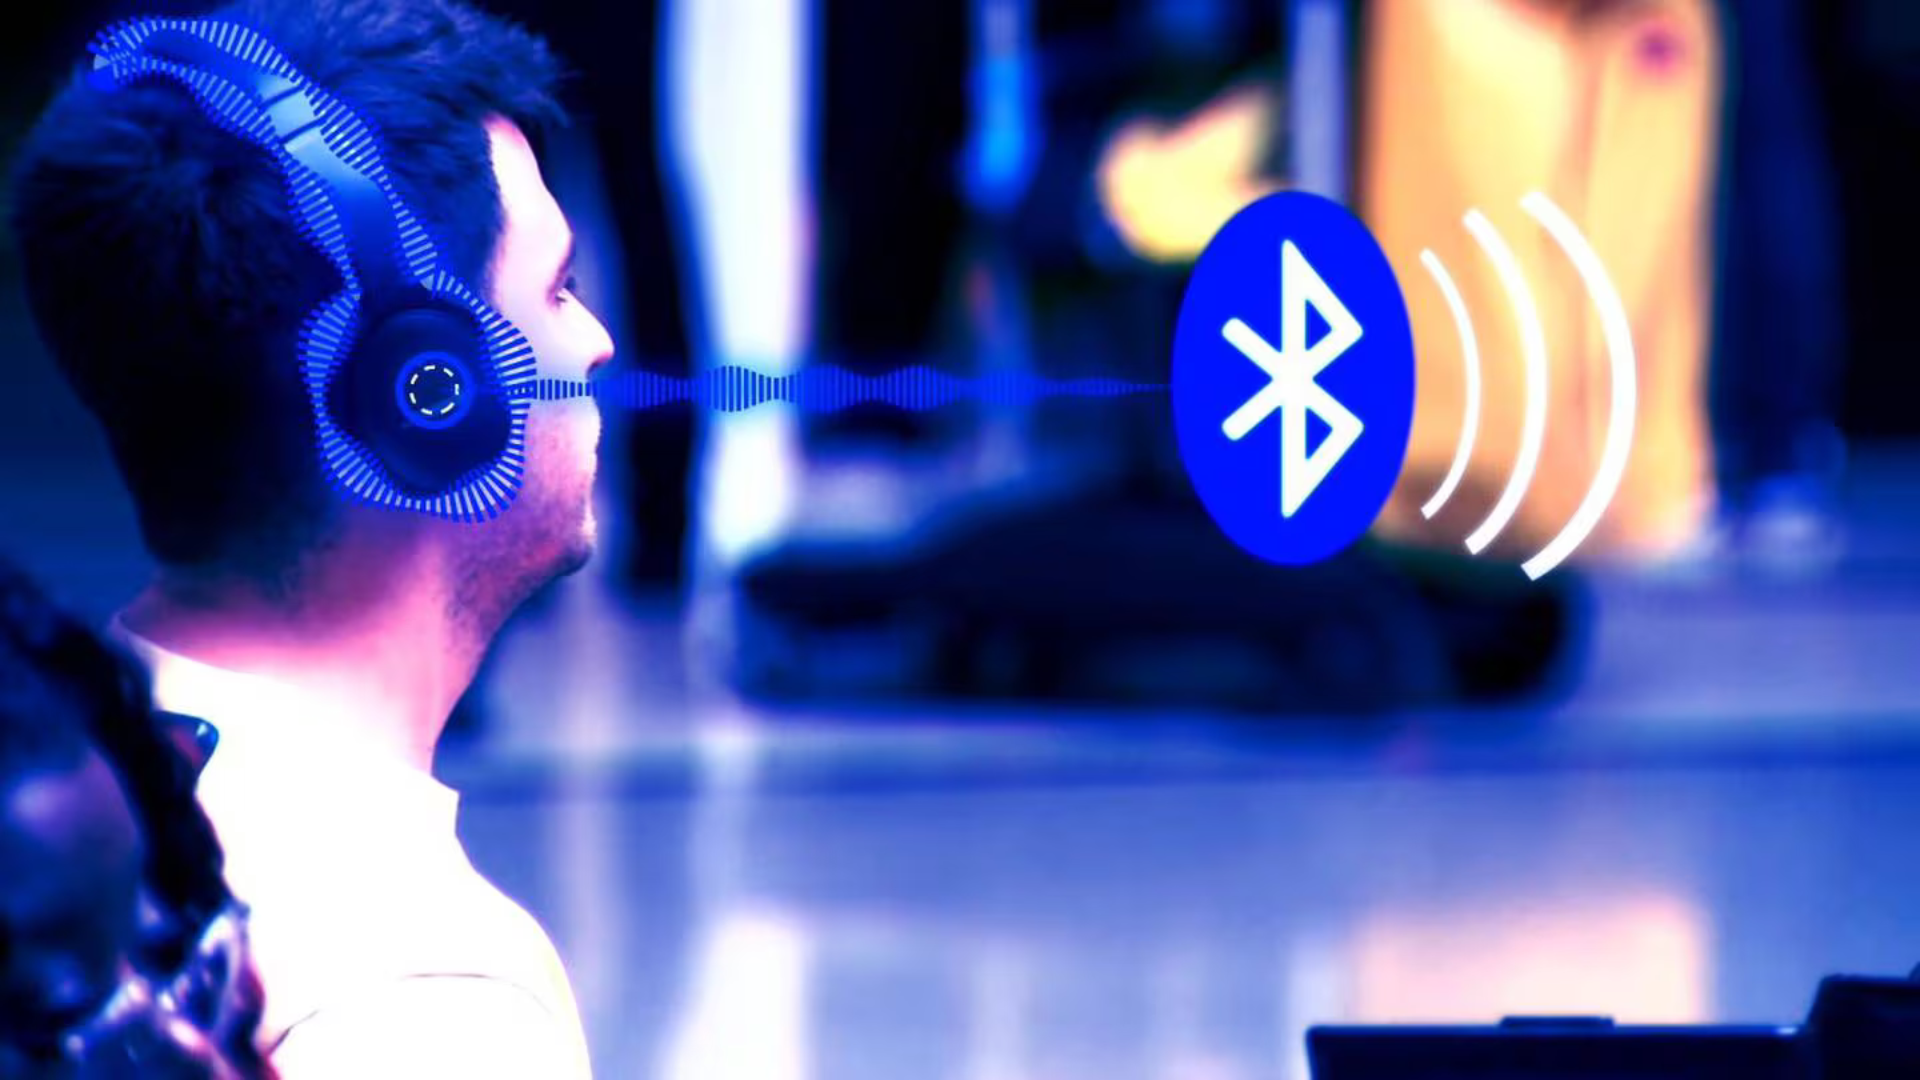 Bluetooth devices to avoid potential security breaches.